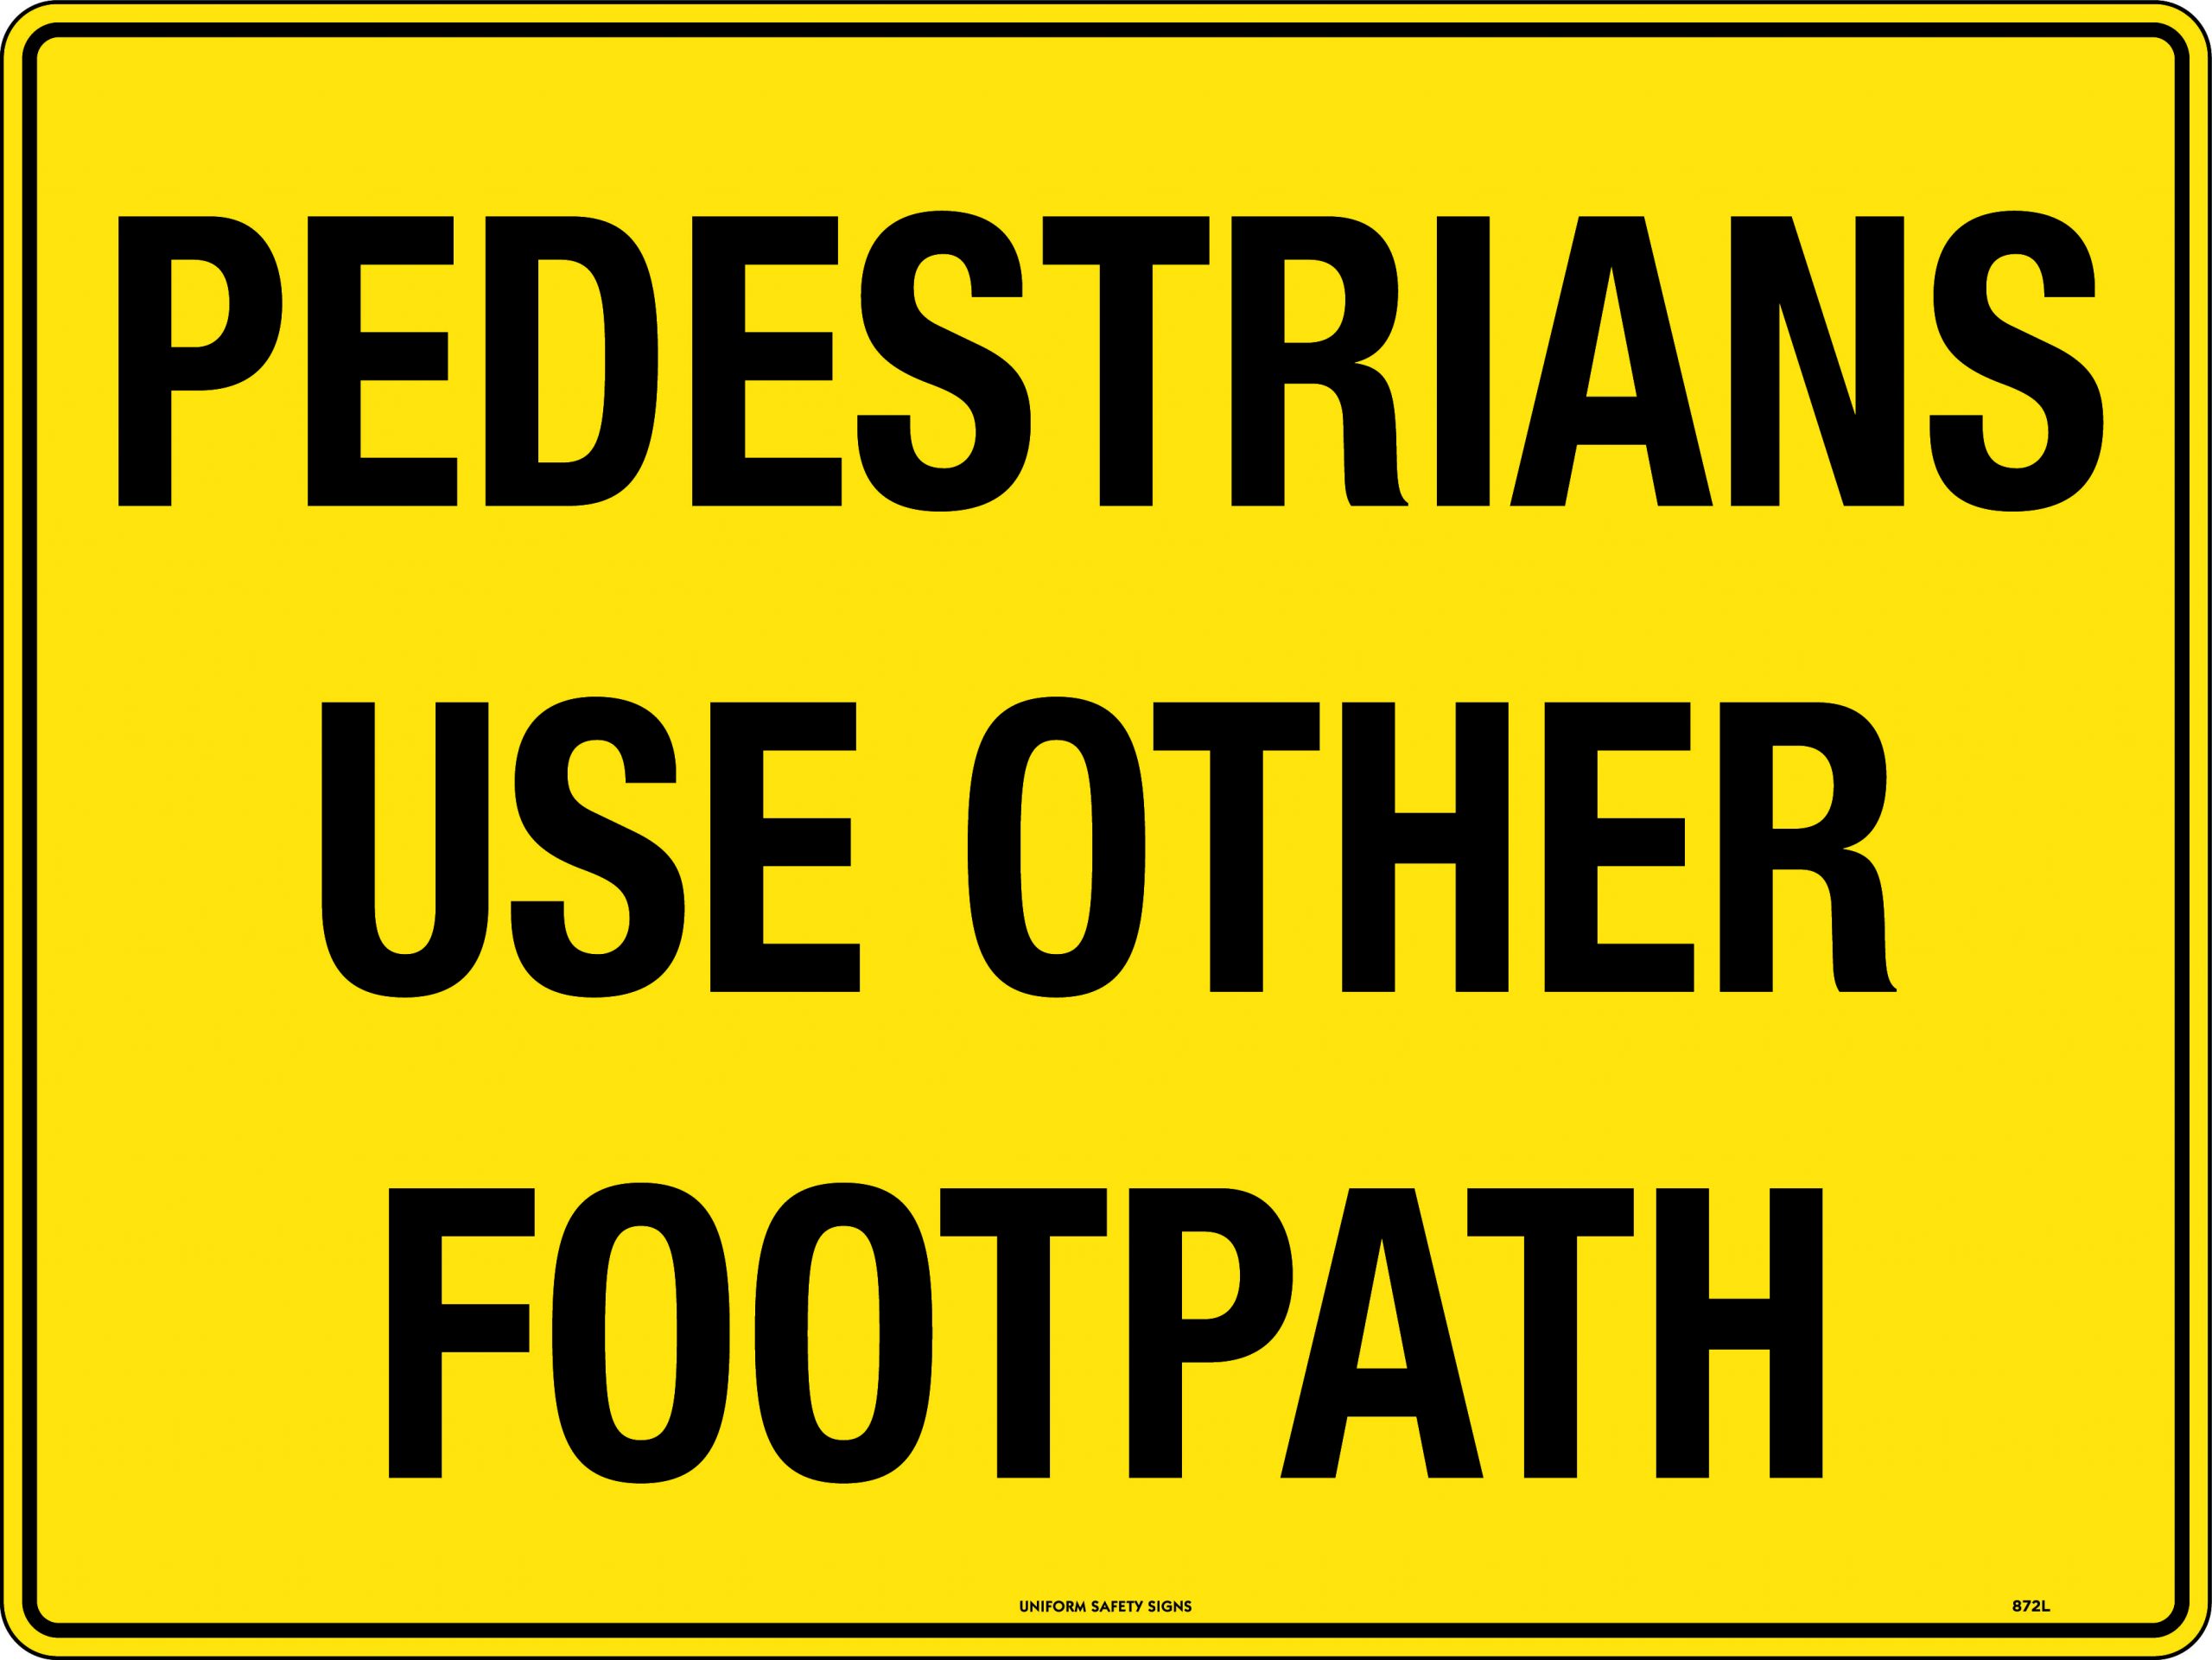 UNIFORM SAFETY 600X450MM POLY PEDESTRIANS USE OTHER FOOTPATH 